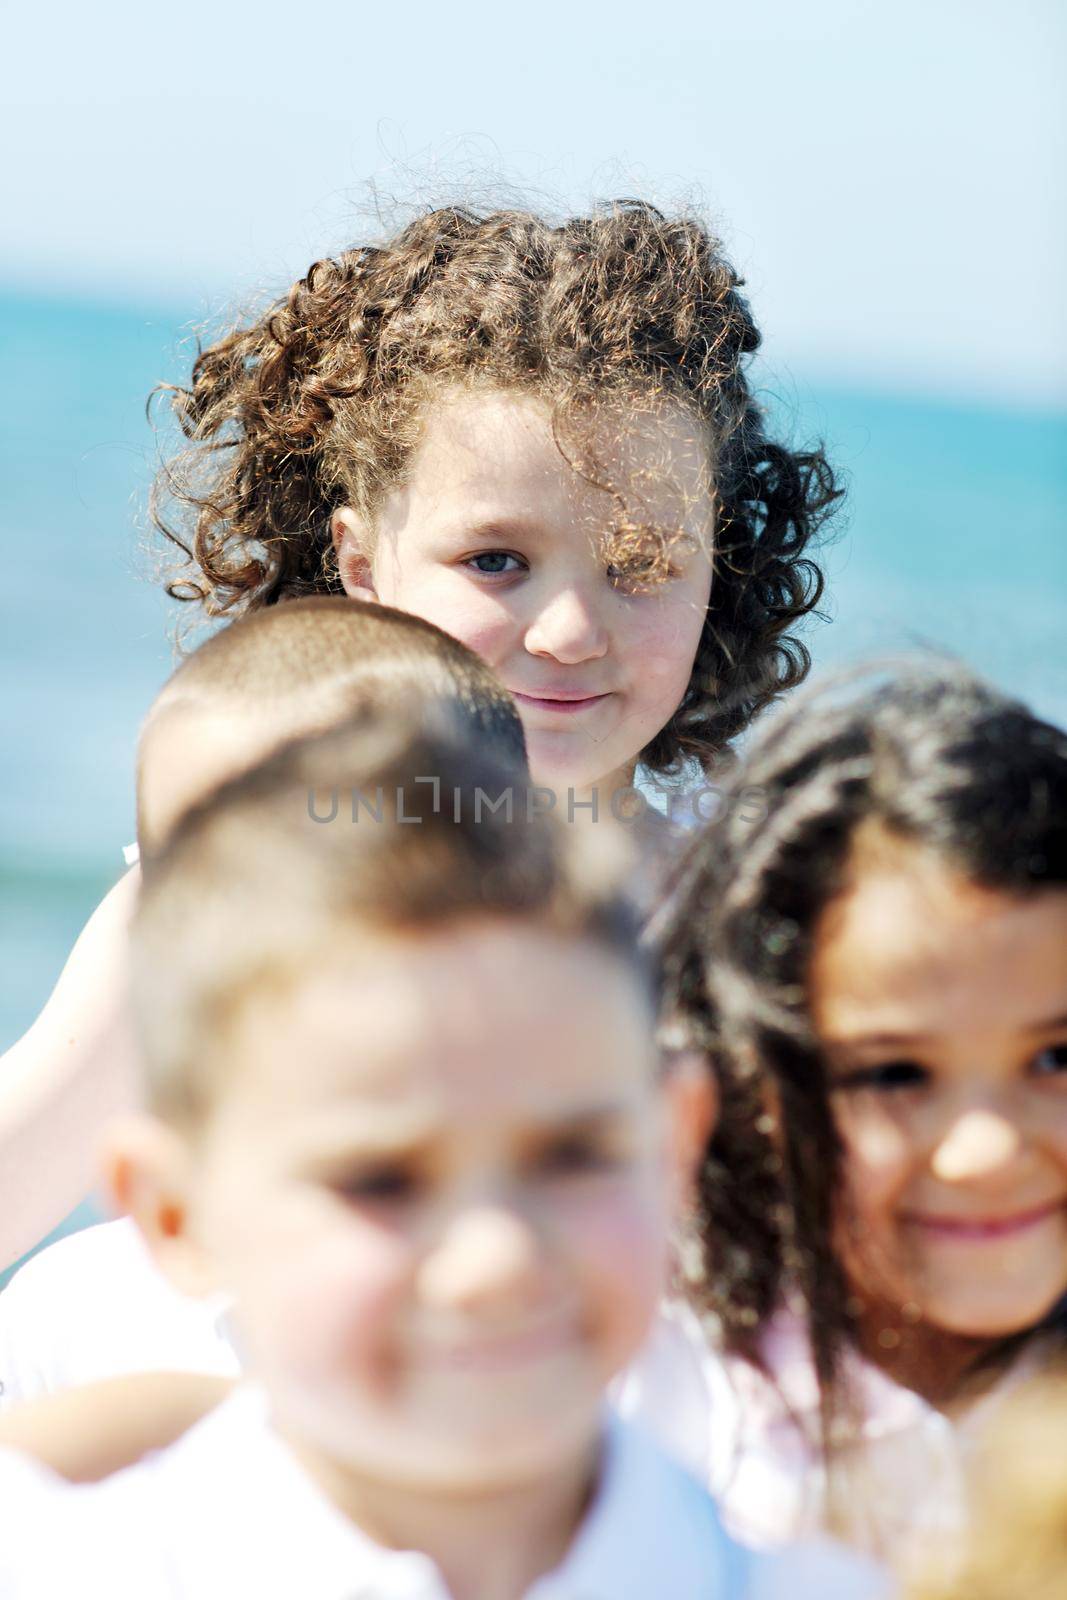 group of happy child on beach who have fun and play games